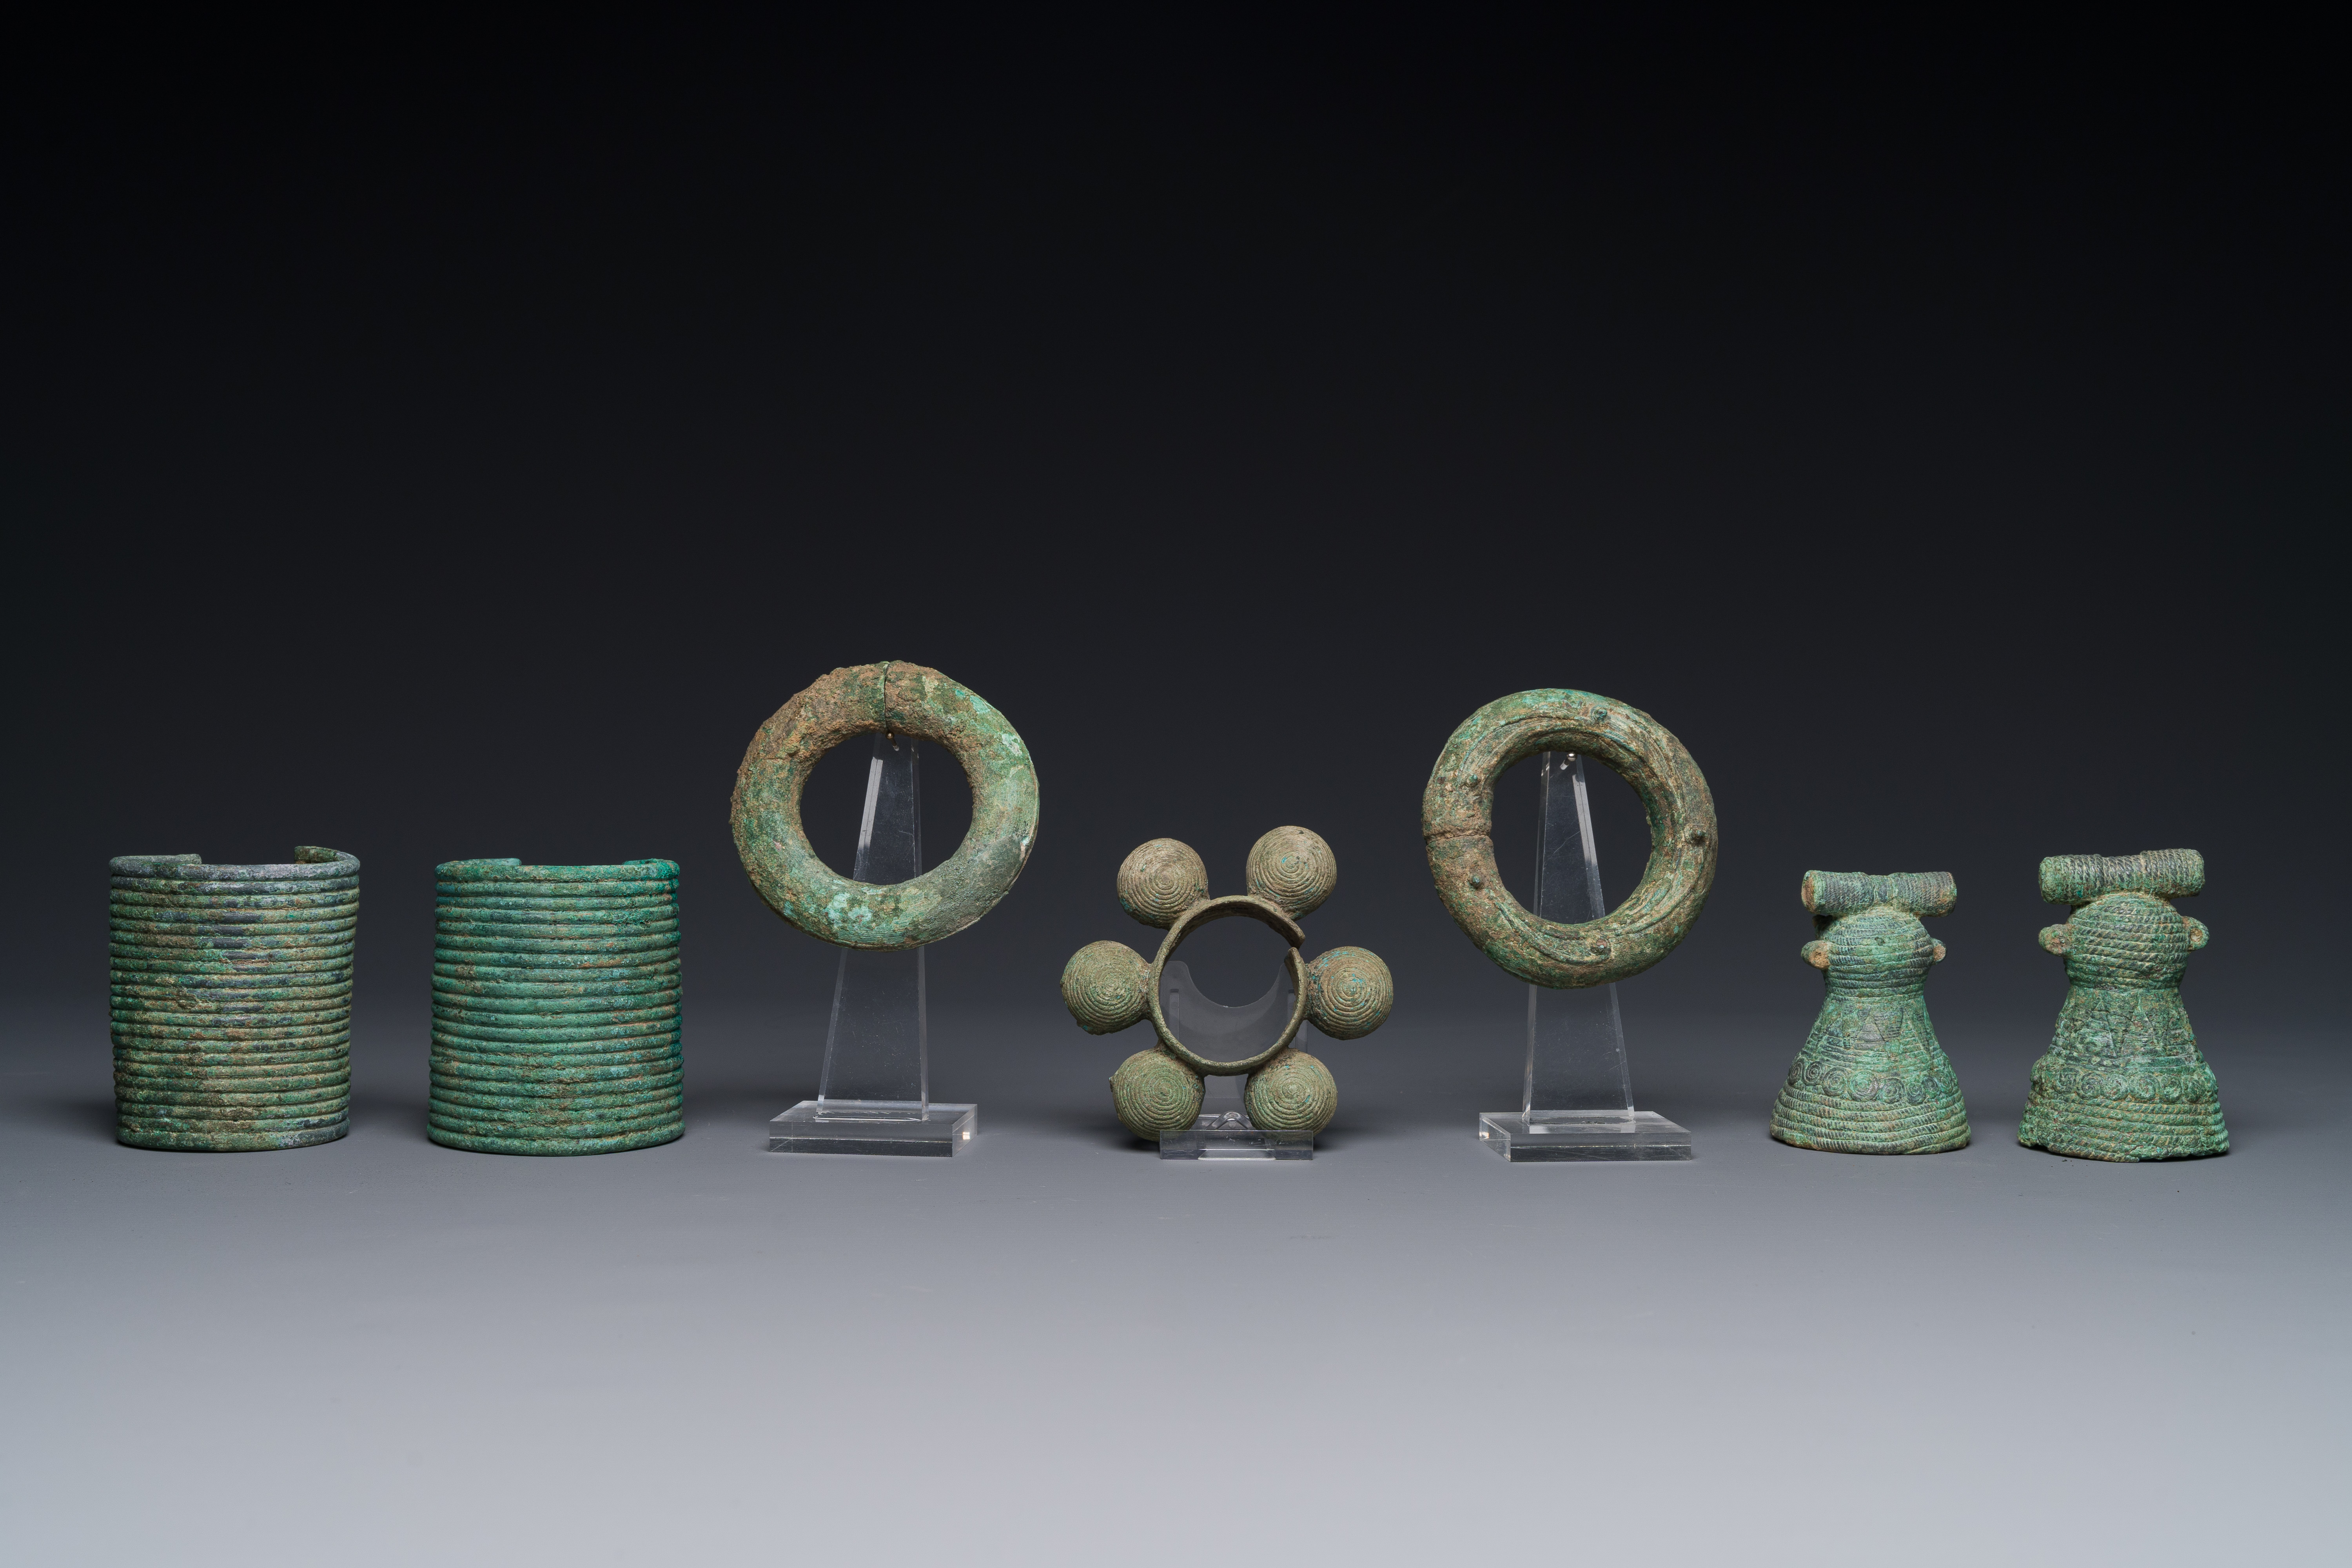 A collection of bronze bracelets and animal bells, Vietnam and Cambodia, 4th/1st C. B.C - Image 3 of 18